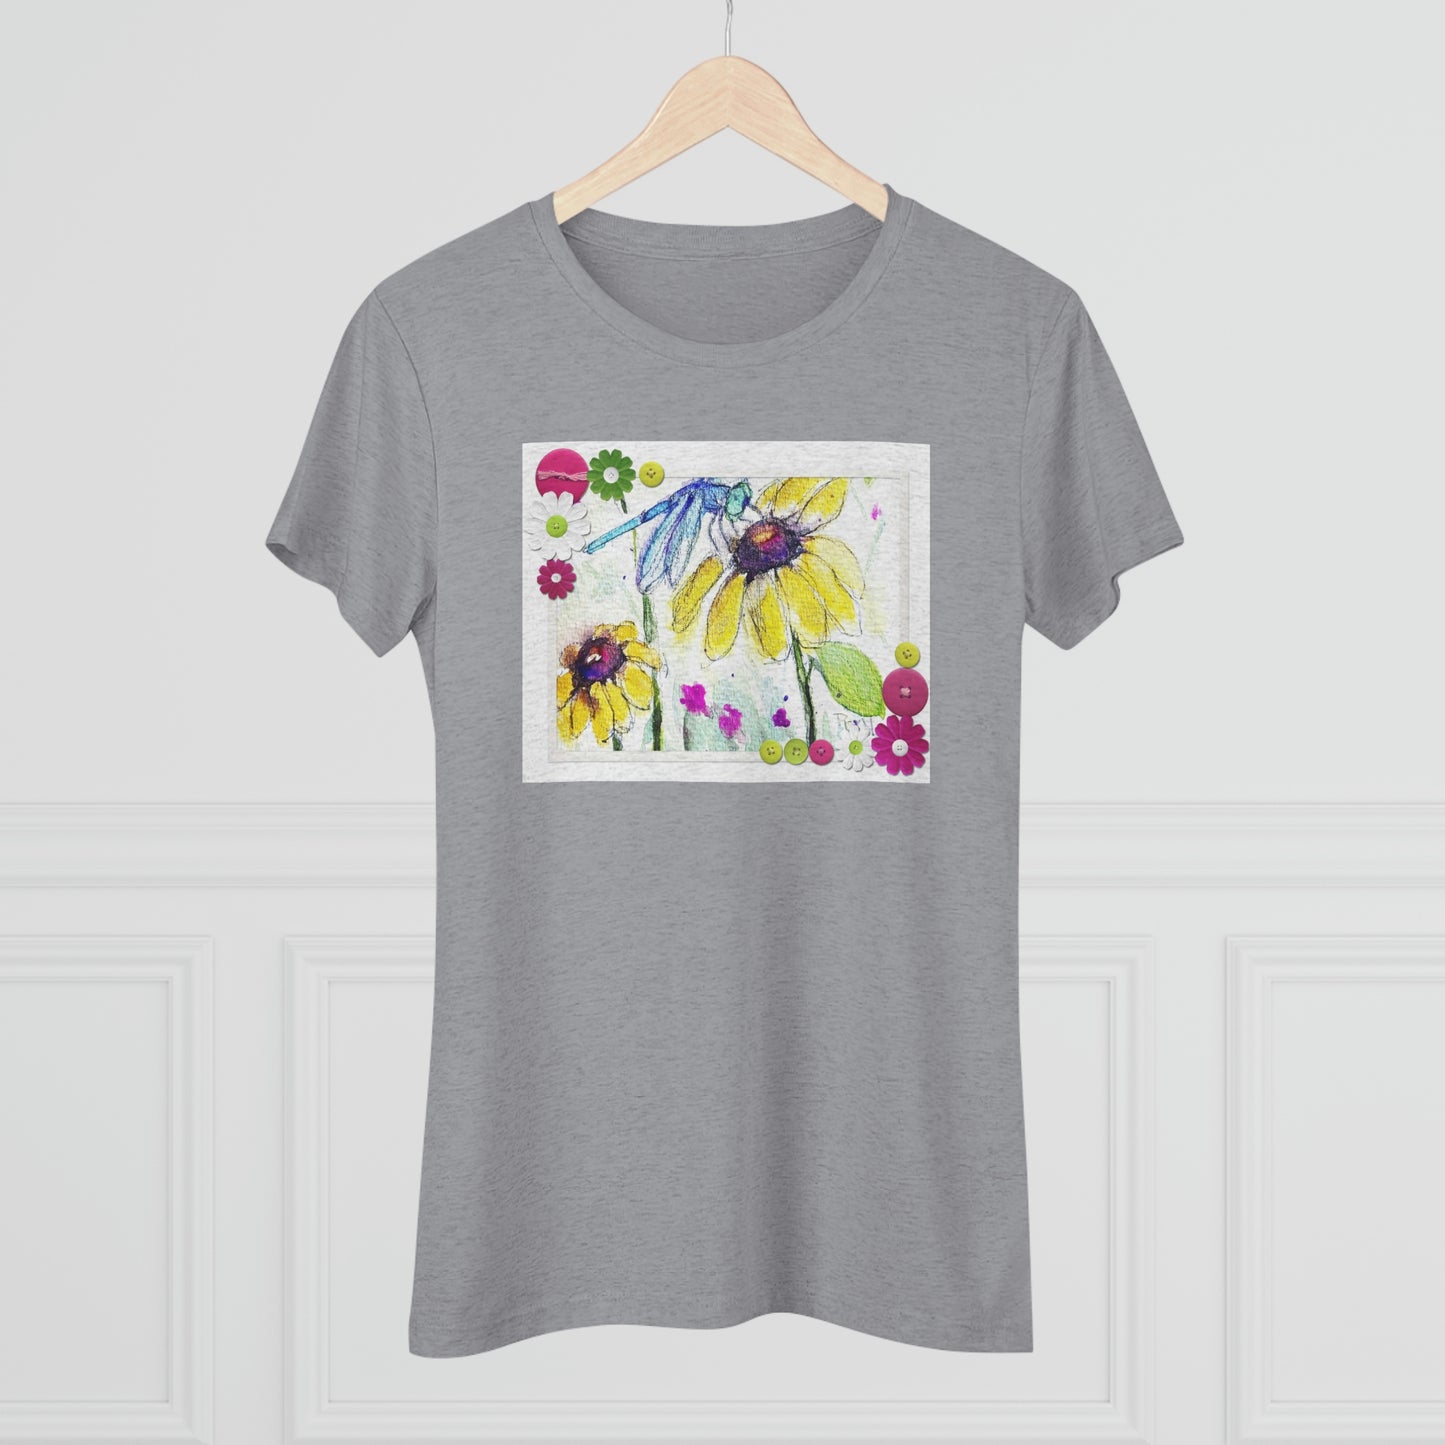 Blue Dragonfly Women's fitted Triblend Tee  tee shirt